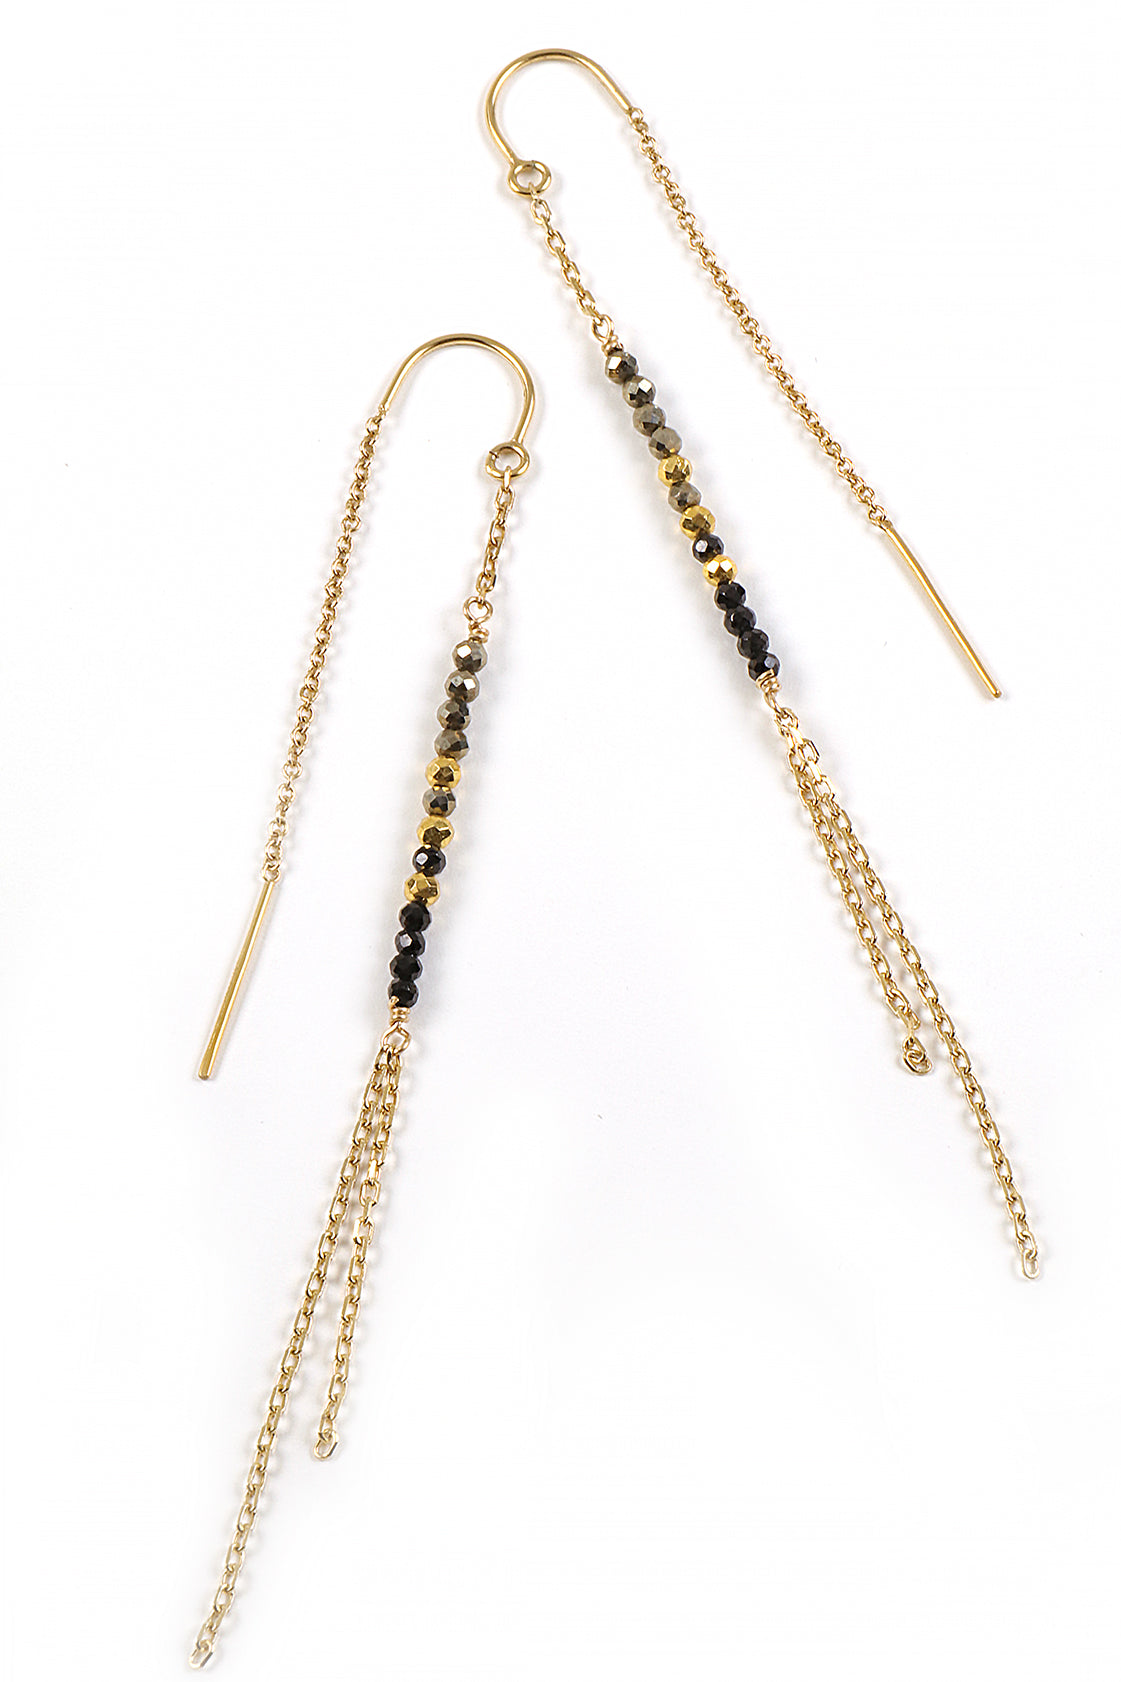 Black Spinel and Pyrite Threader Earrings